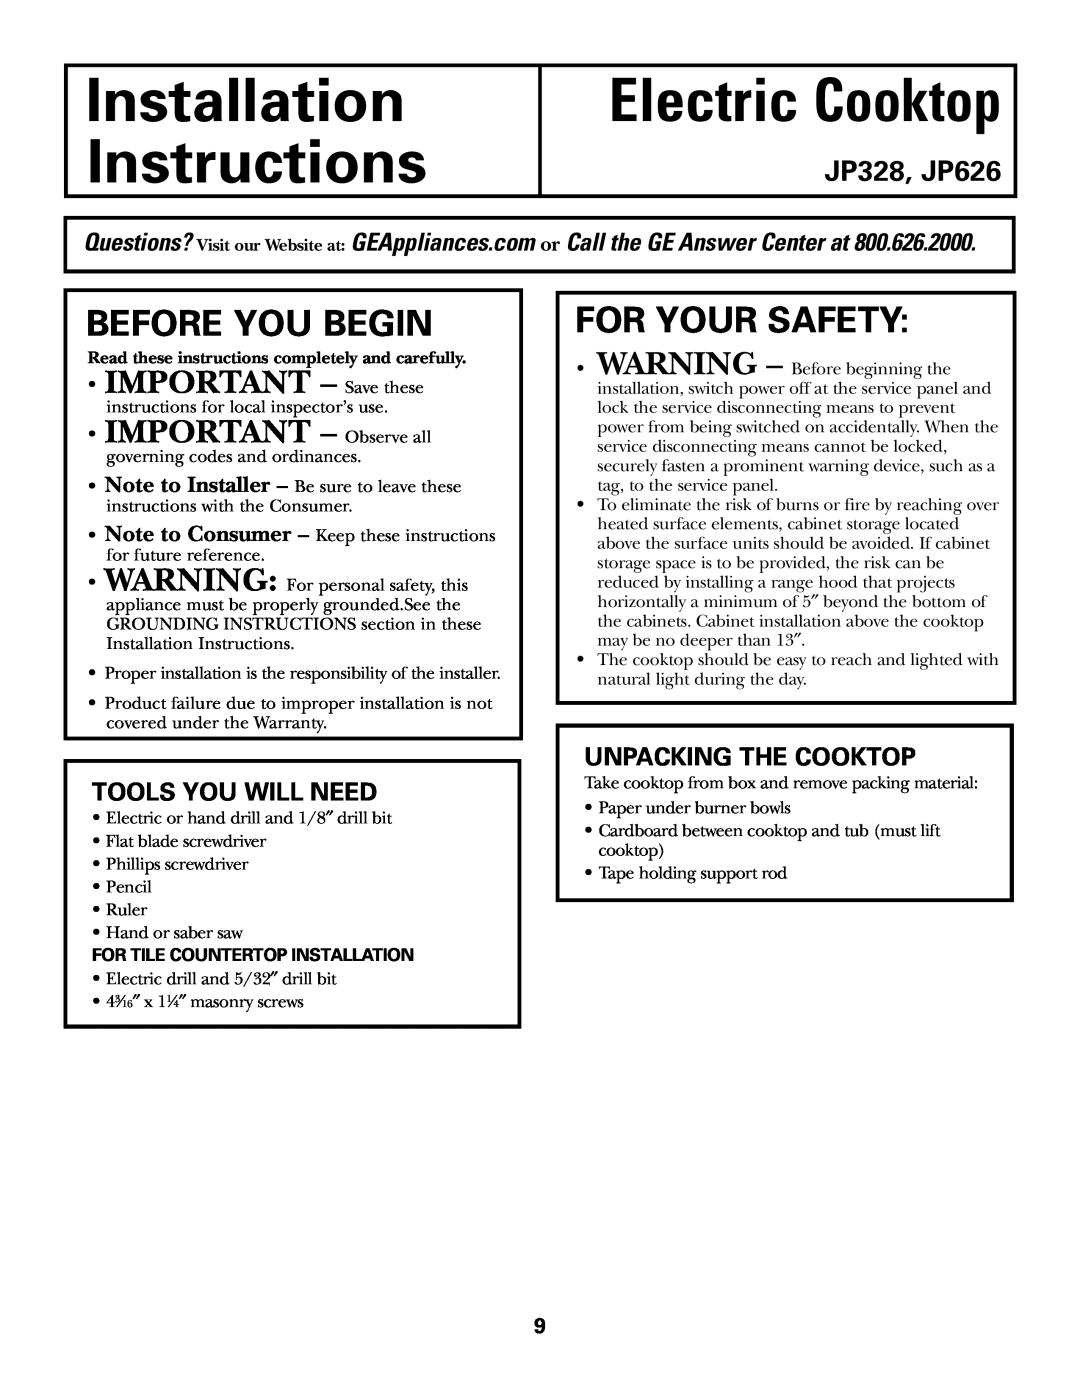 Hilti JP328, JP626 Installation Instructions, Electric Cooktop, Before You Begin, For Your Safety, IMPORTANT - Save these 